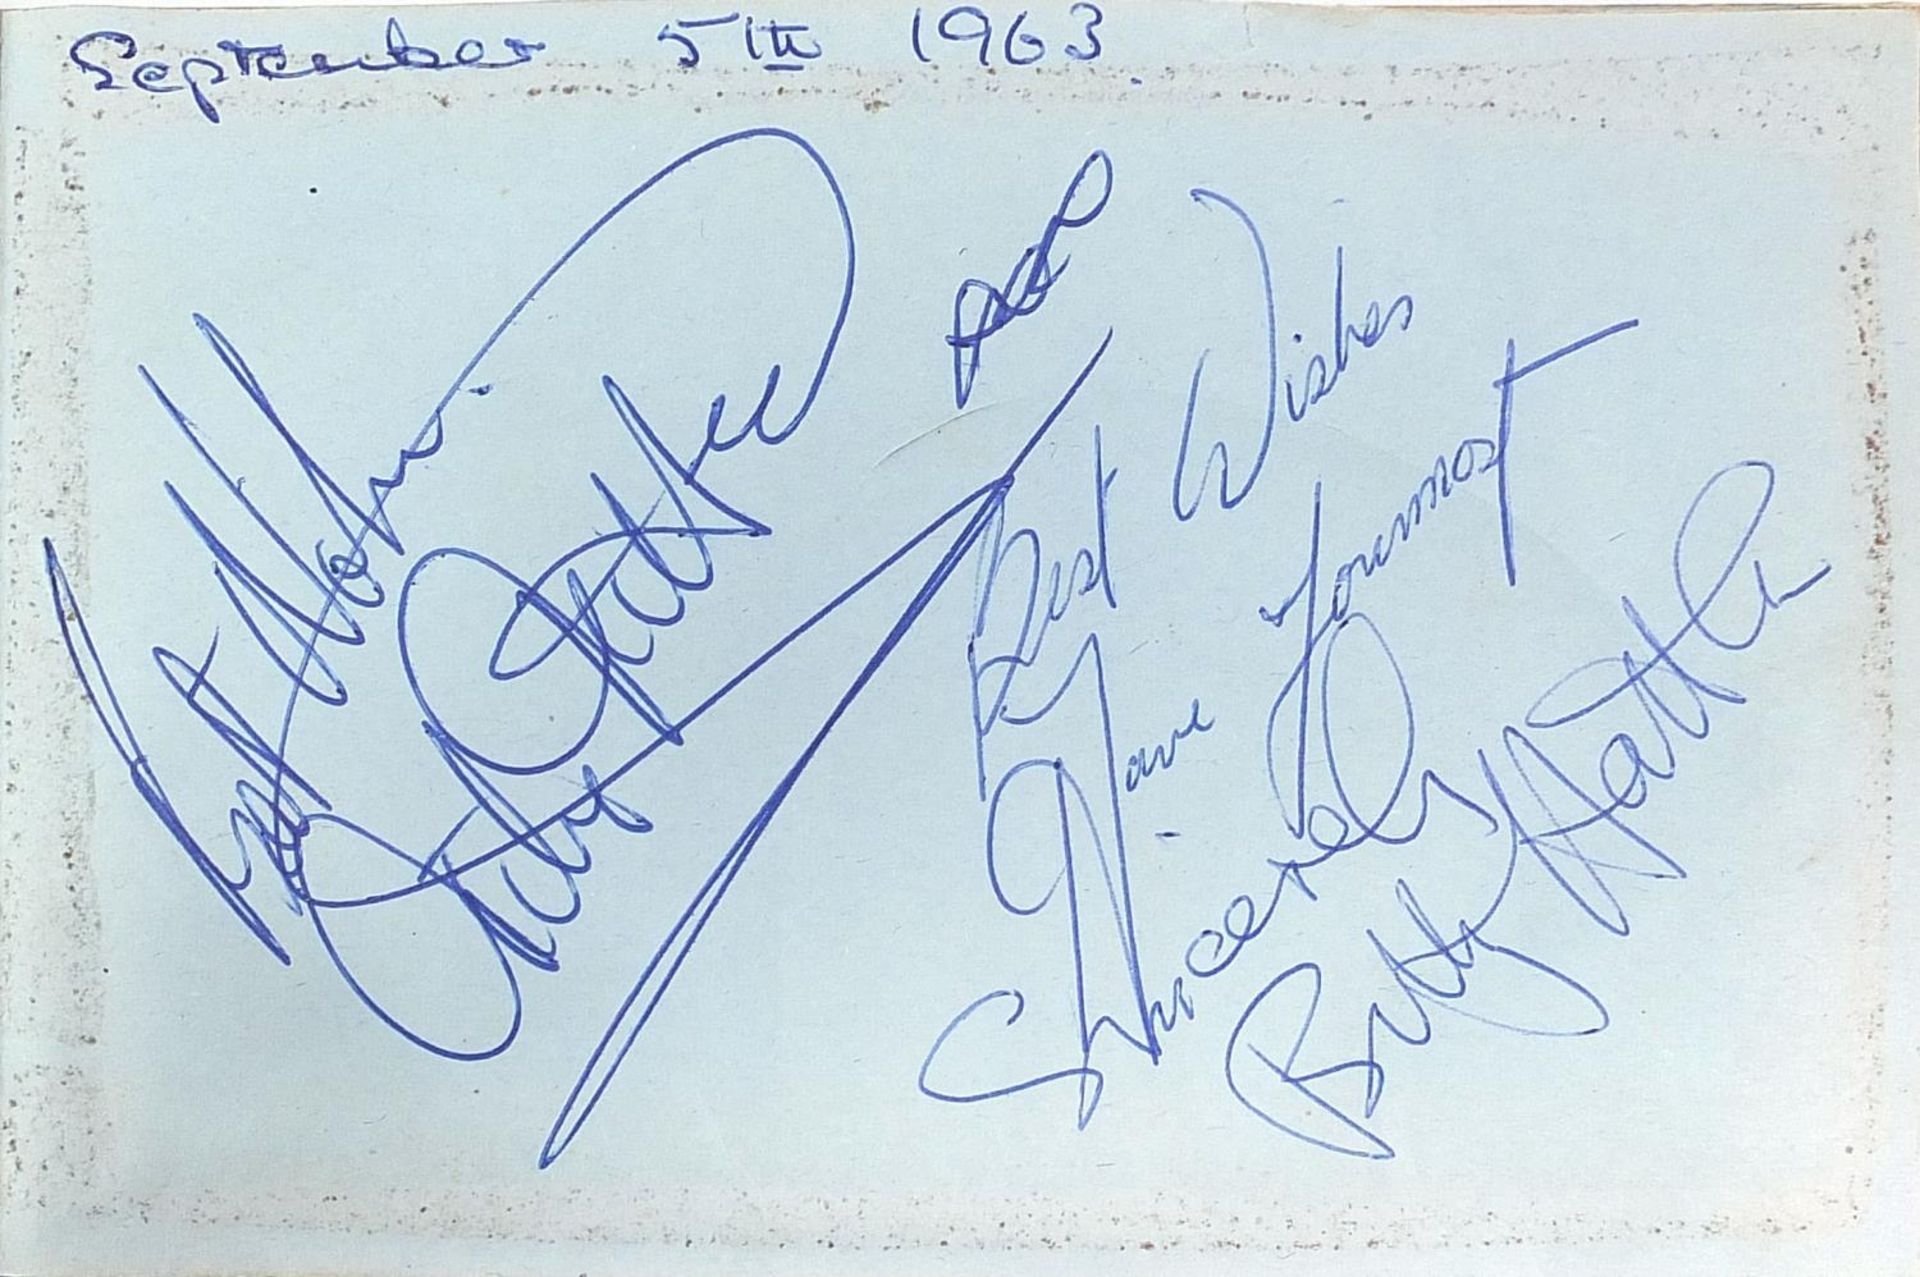 1960's autograph album with various autographs : For Further Condition Reports Please Visit Our